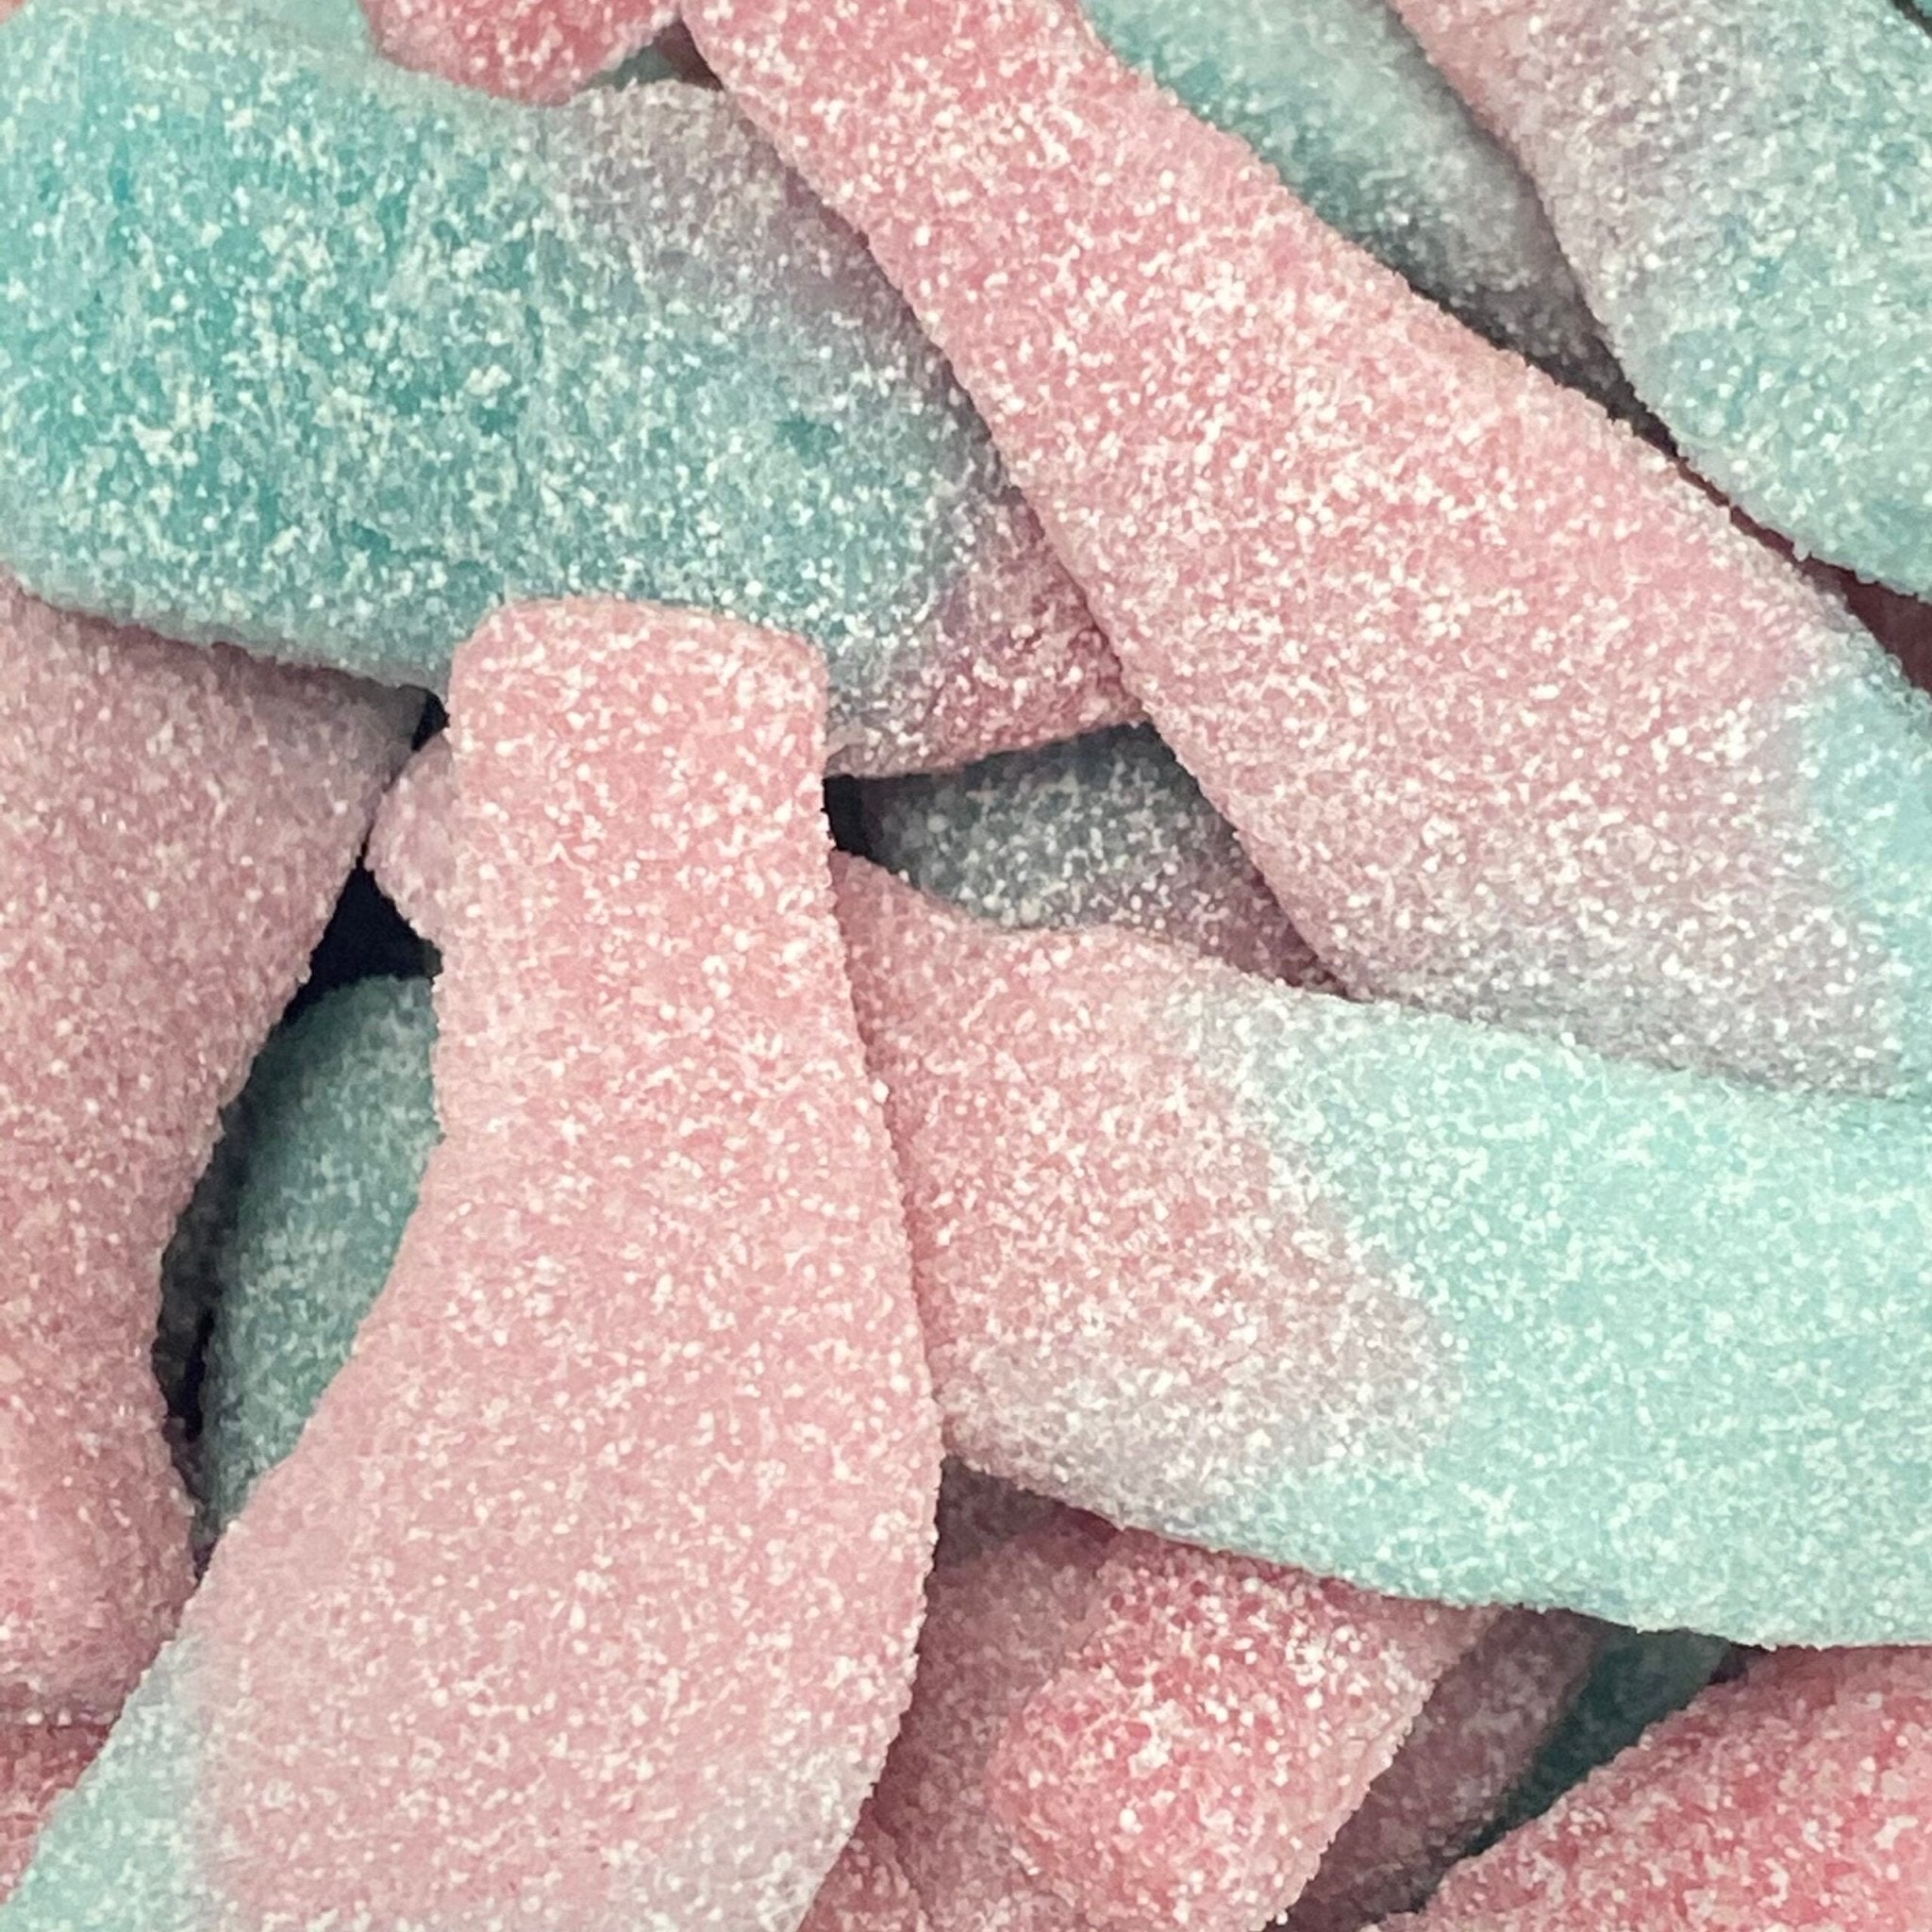 Giant Blue & Pink Bottles - Dream Candy